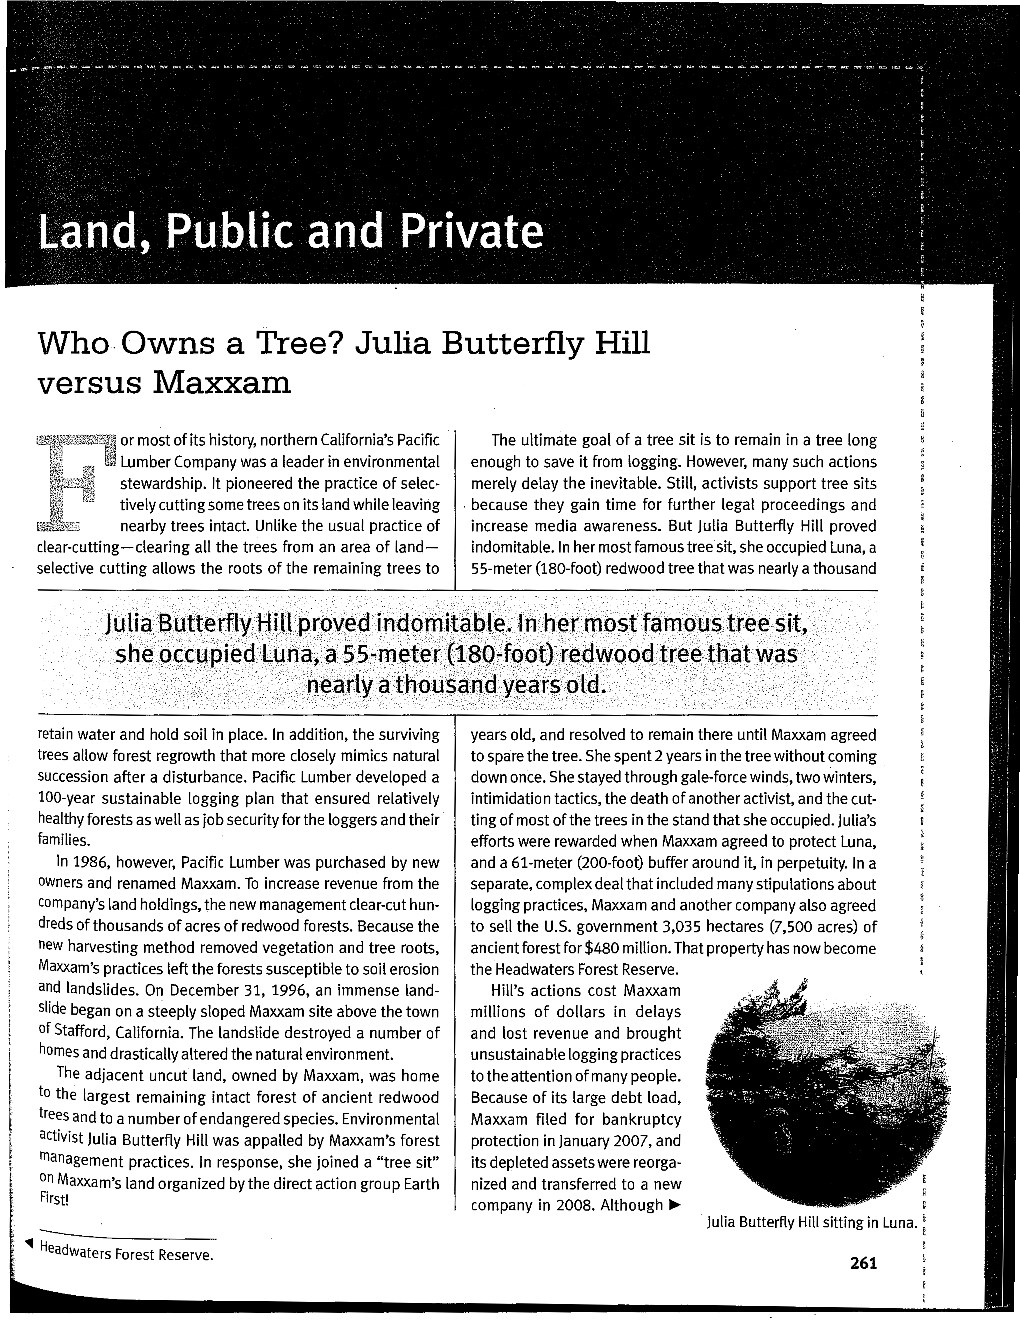 Who. Owns a Tree? Julia Butterfly Hill Versus Maxxam